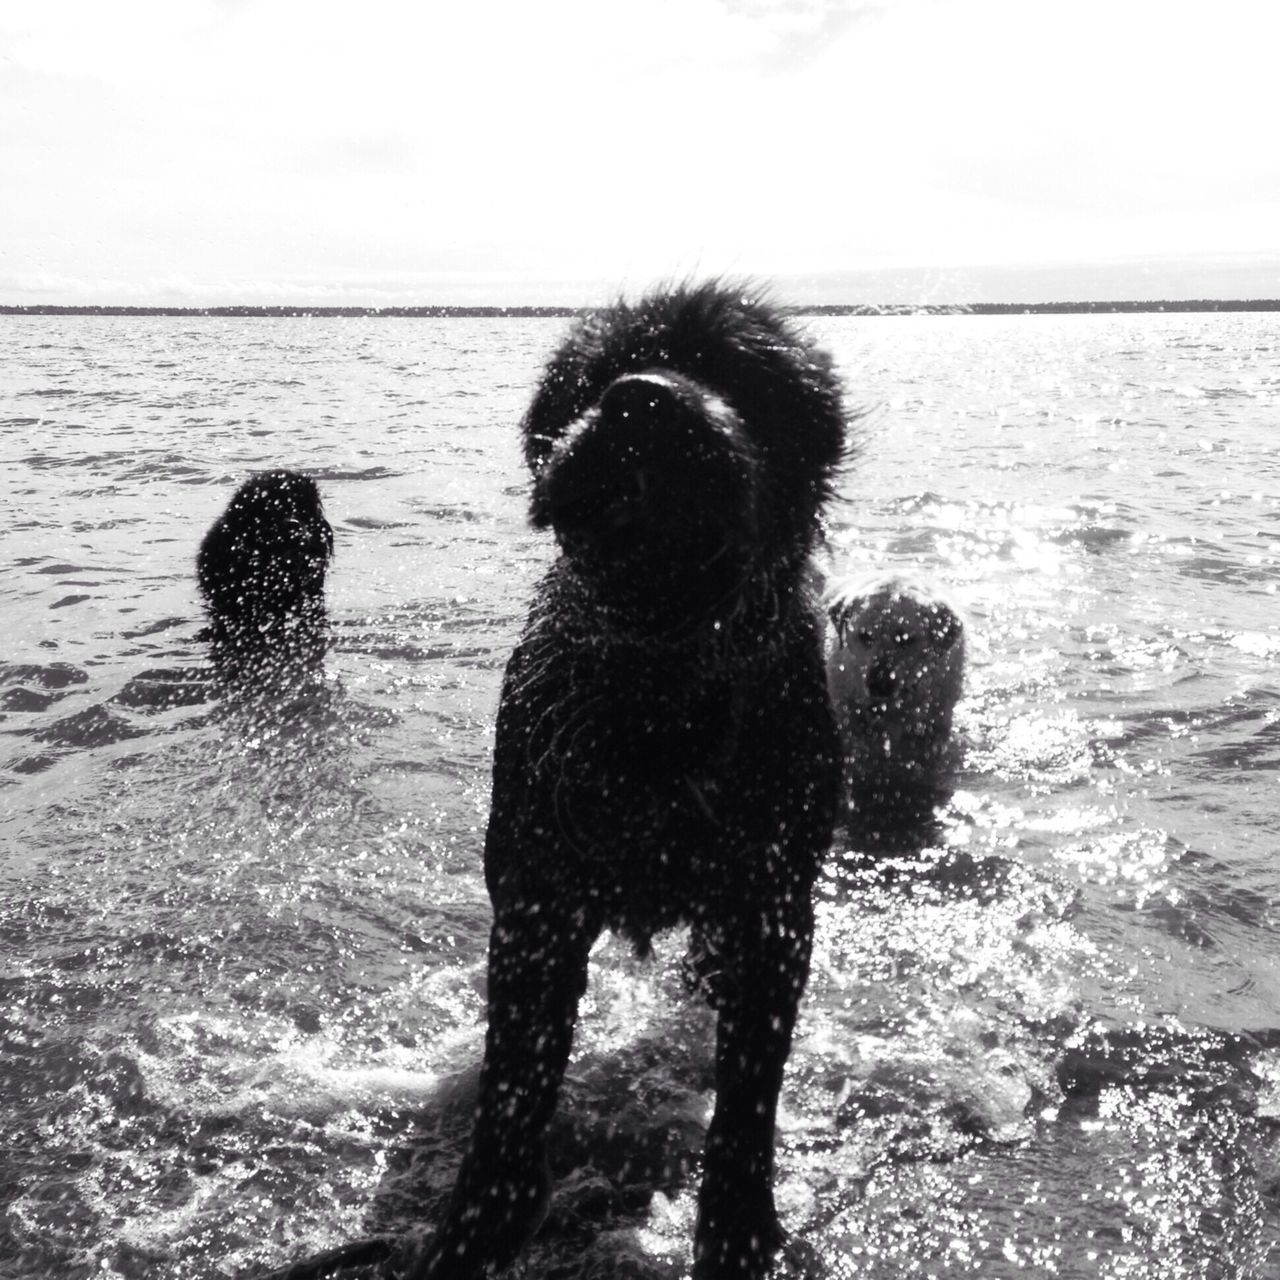 one animal, water, animal themes, dog, pets, sea, mammal, domestic animals, beach, horizon over water, shore, nature, silhouette, standing, black color, tranquility, sky, tranquil scene, outdoors, beauty in nature